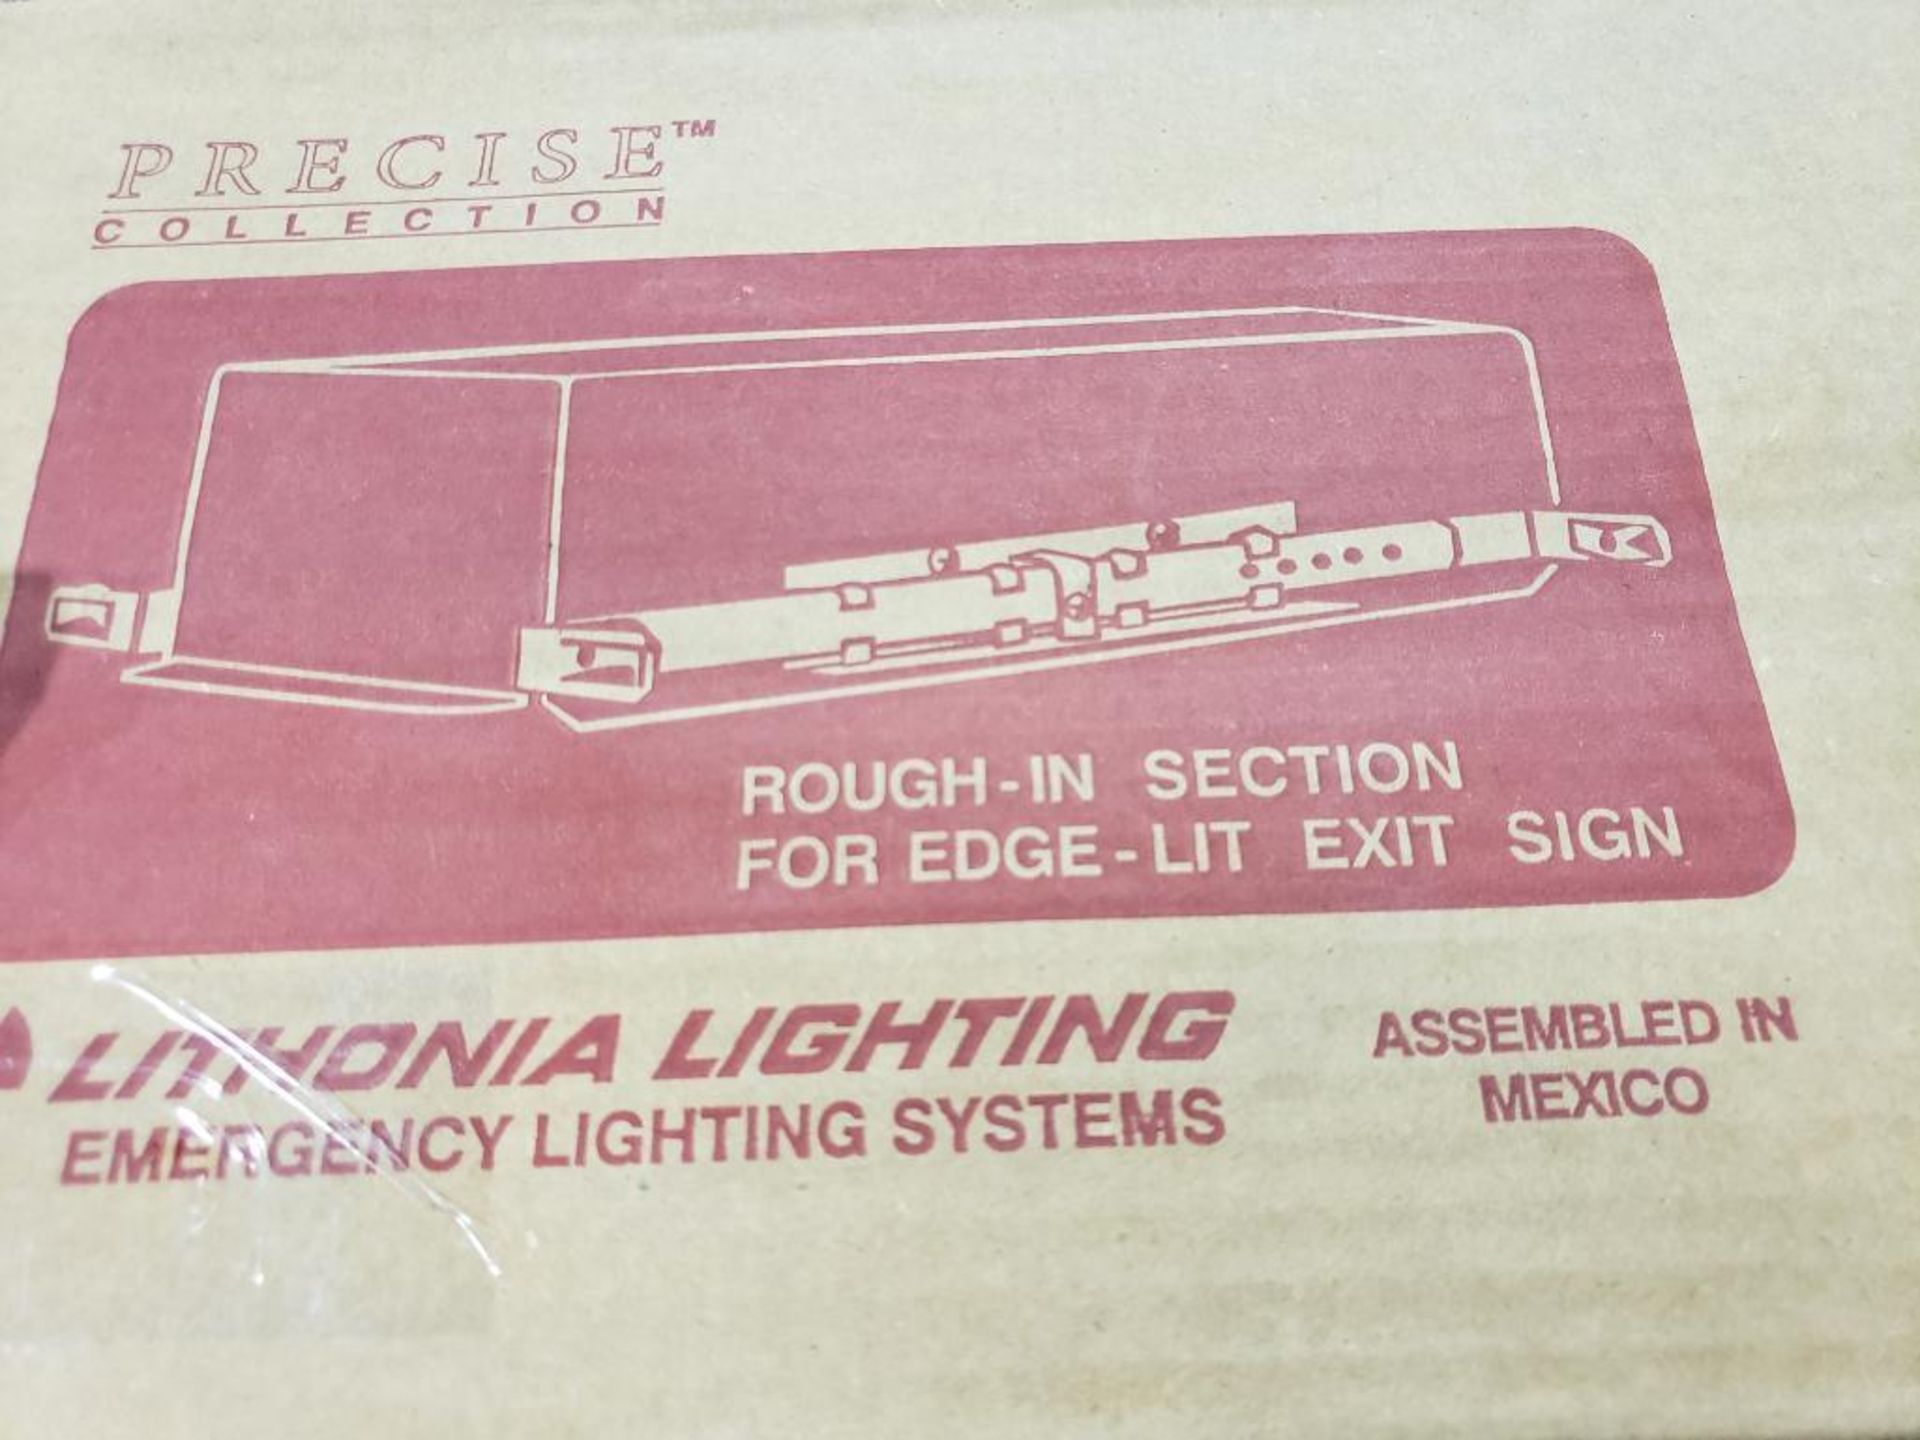 Qty 4 - Lithonia Lighting emergency lighting systems rough in section for edge lit exit sign. New. - Image 2 of 6